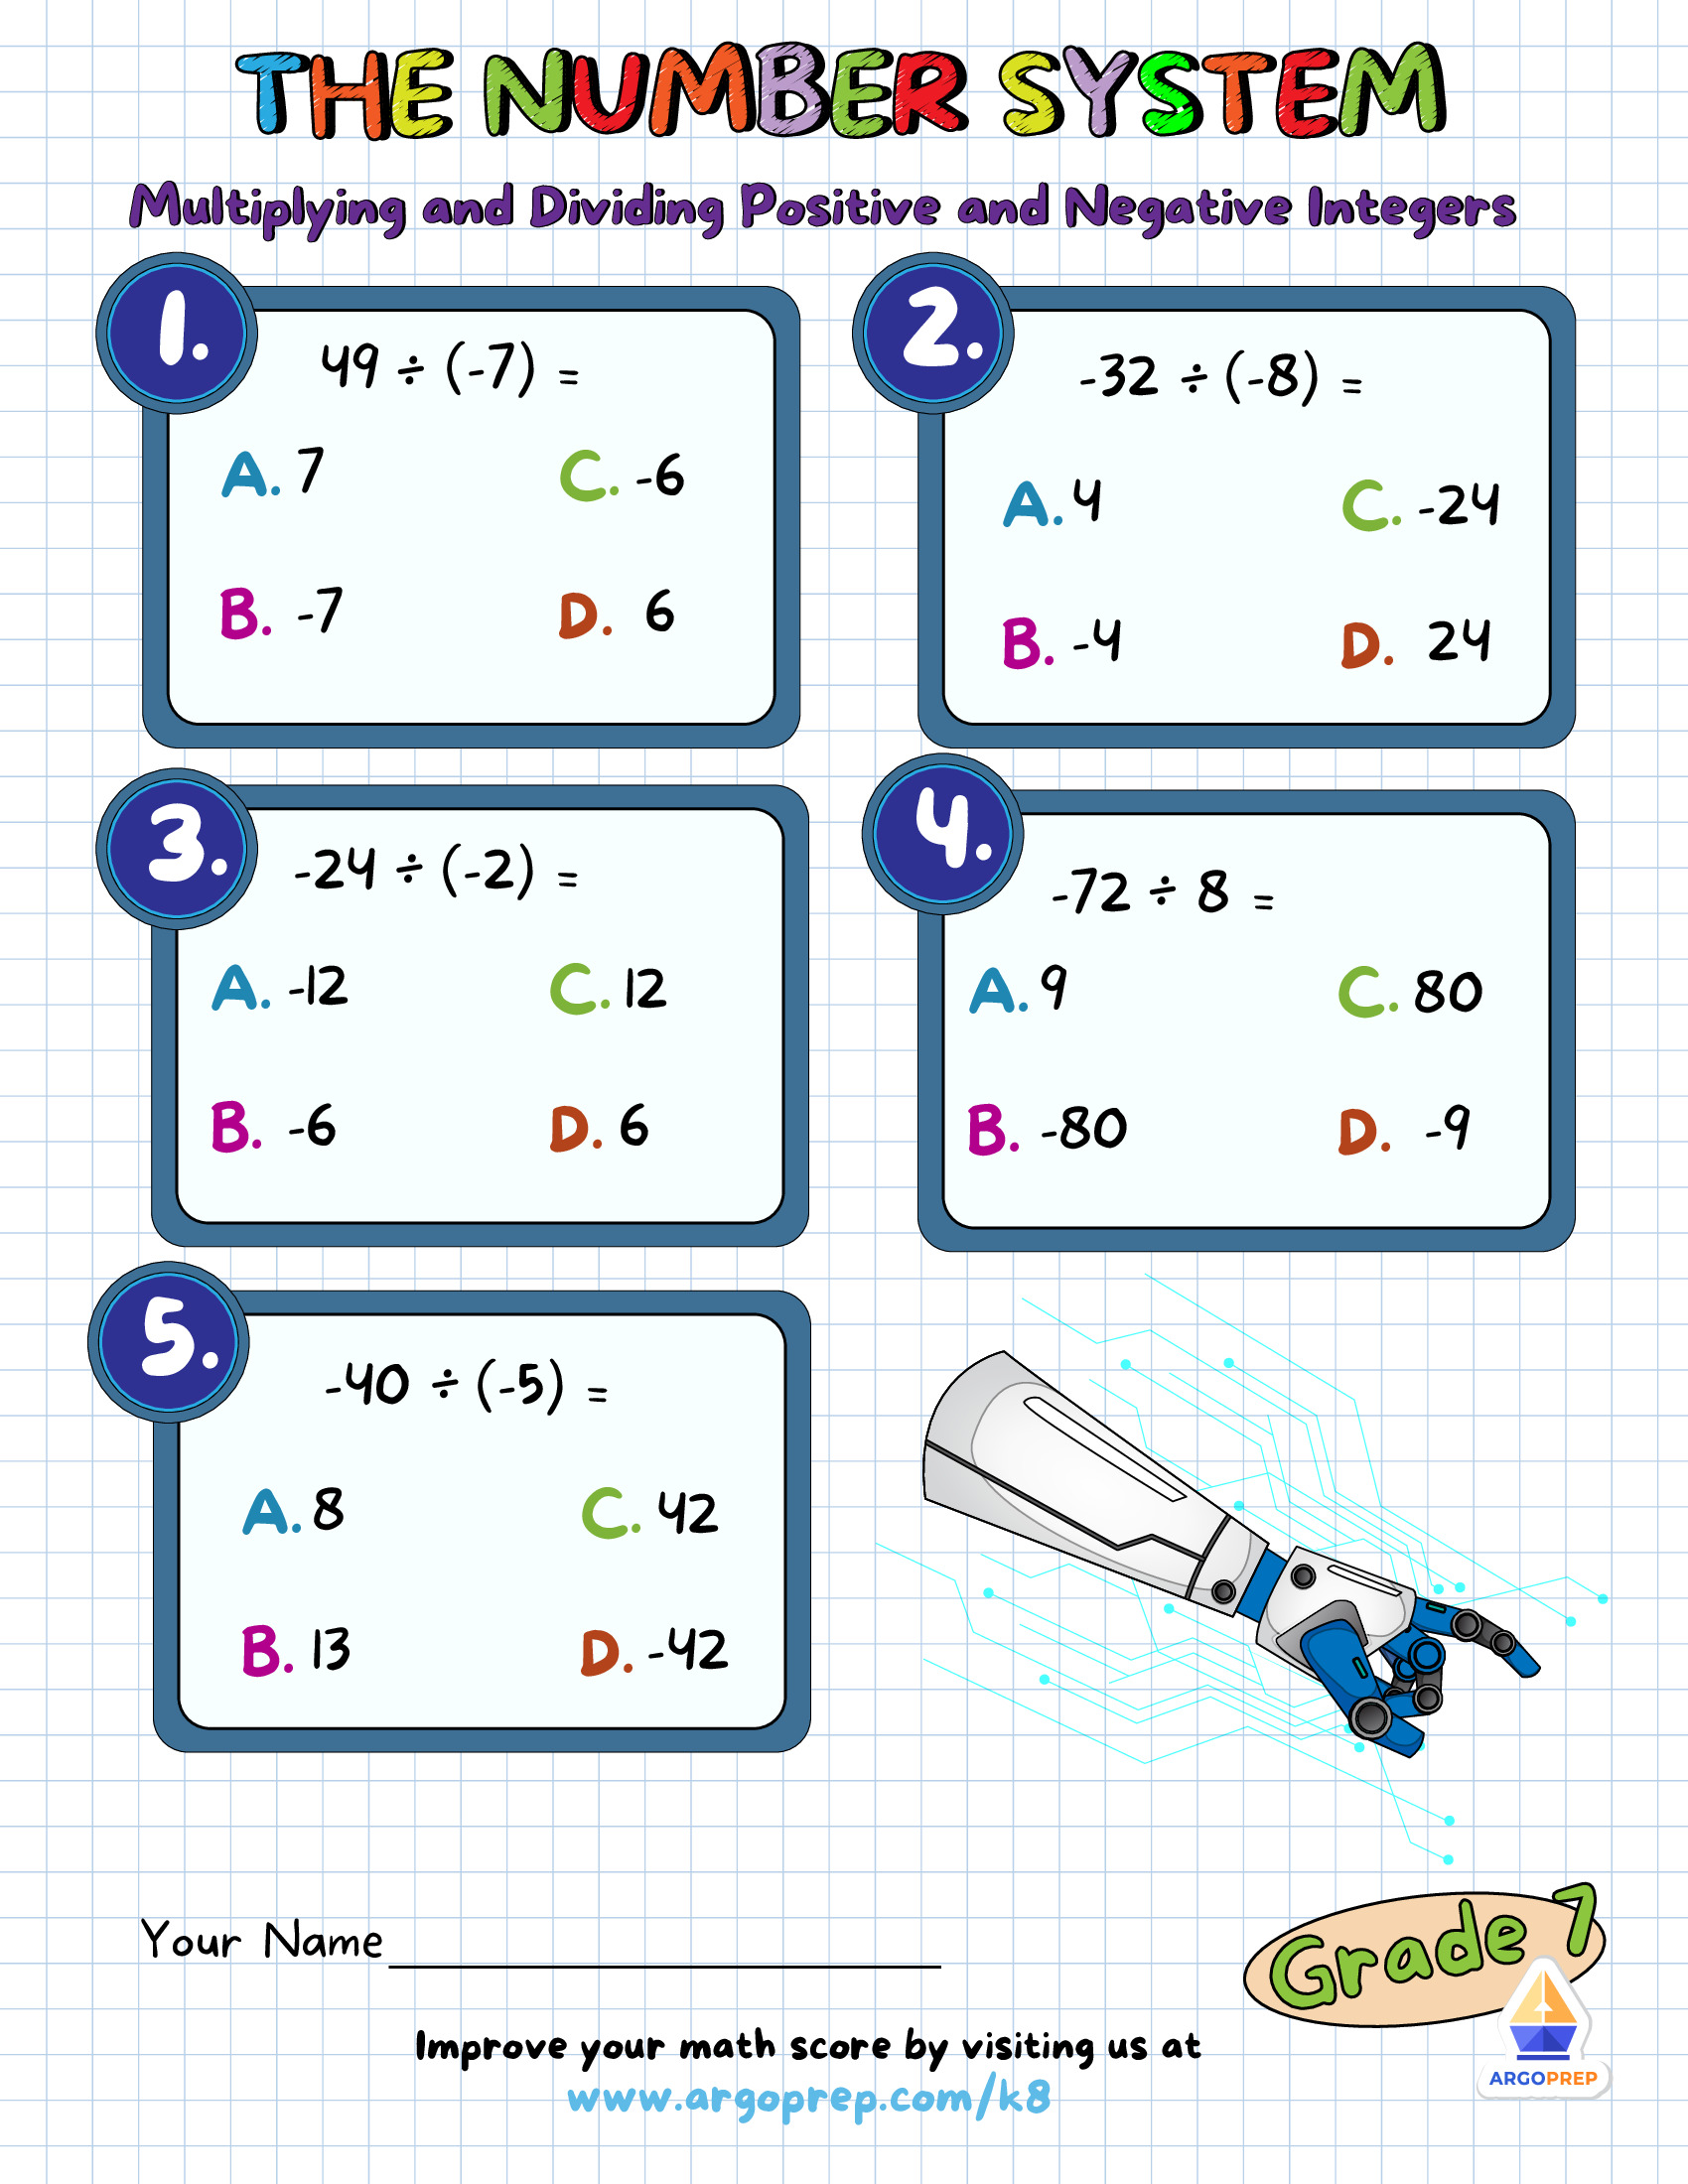 Multiplying and Dividing Integers Worksheets - ArgoPrep For Multiplying And Dividing Integers Worksheet